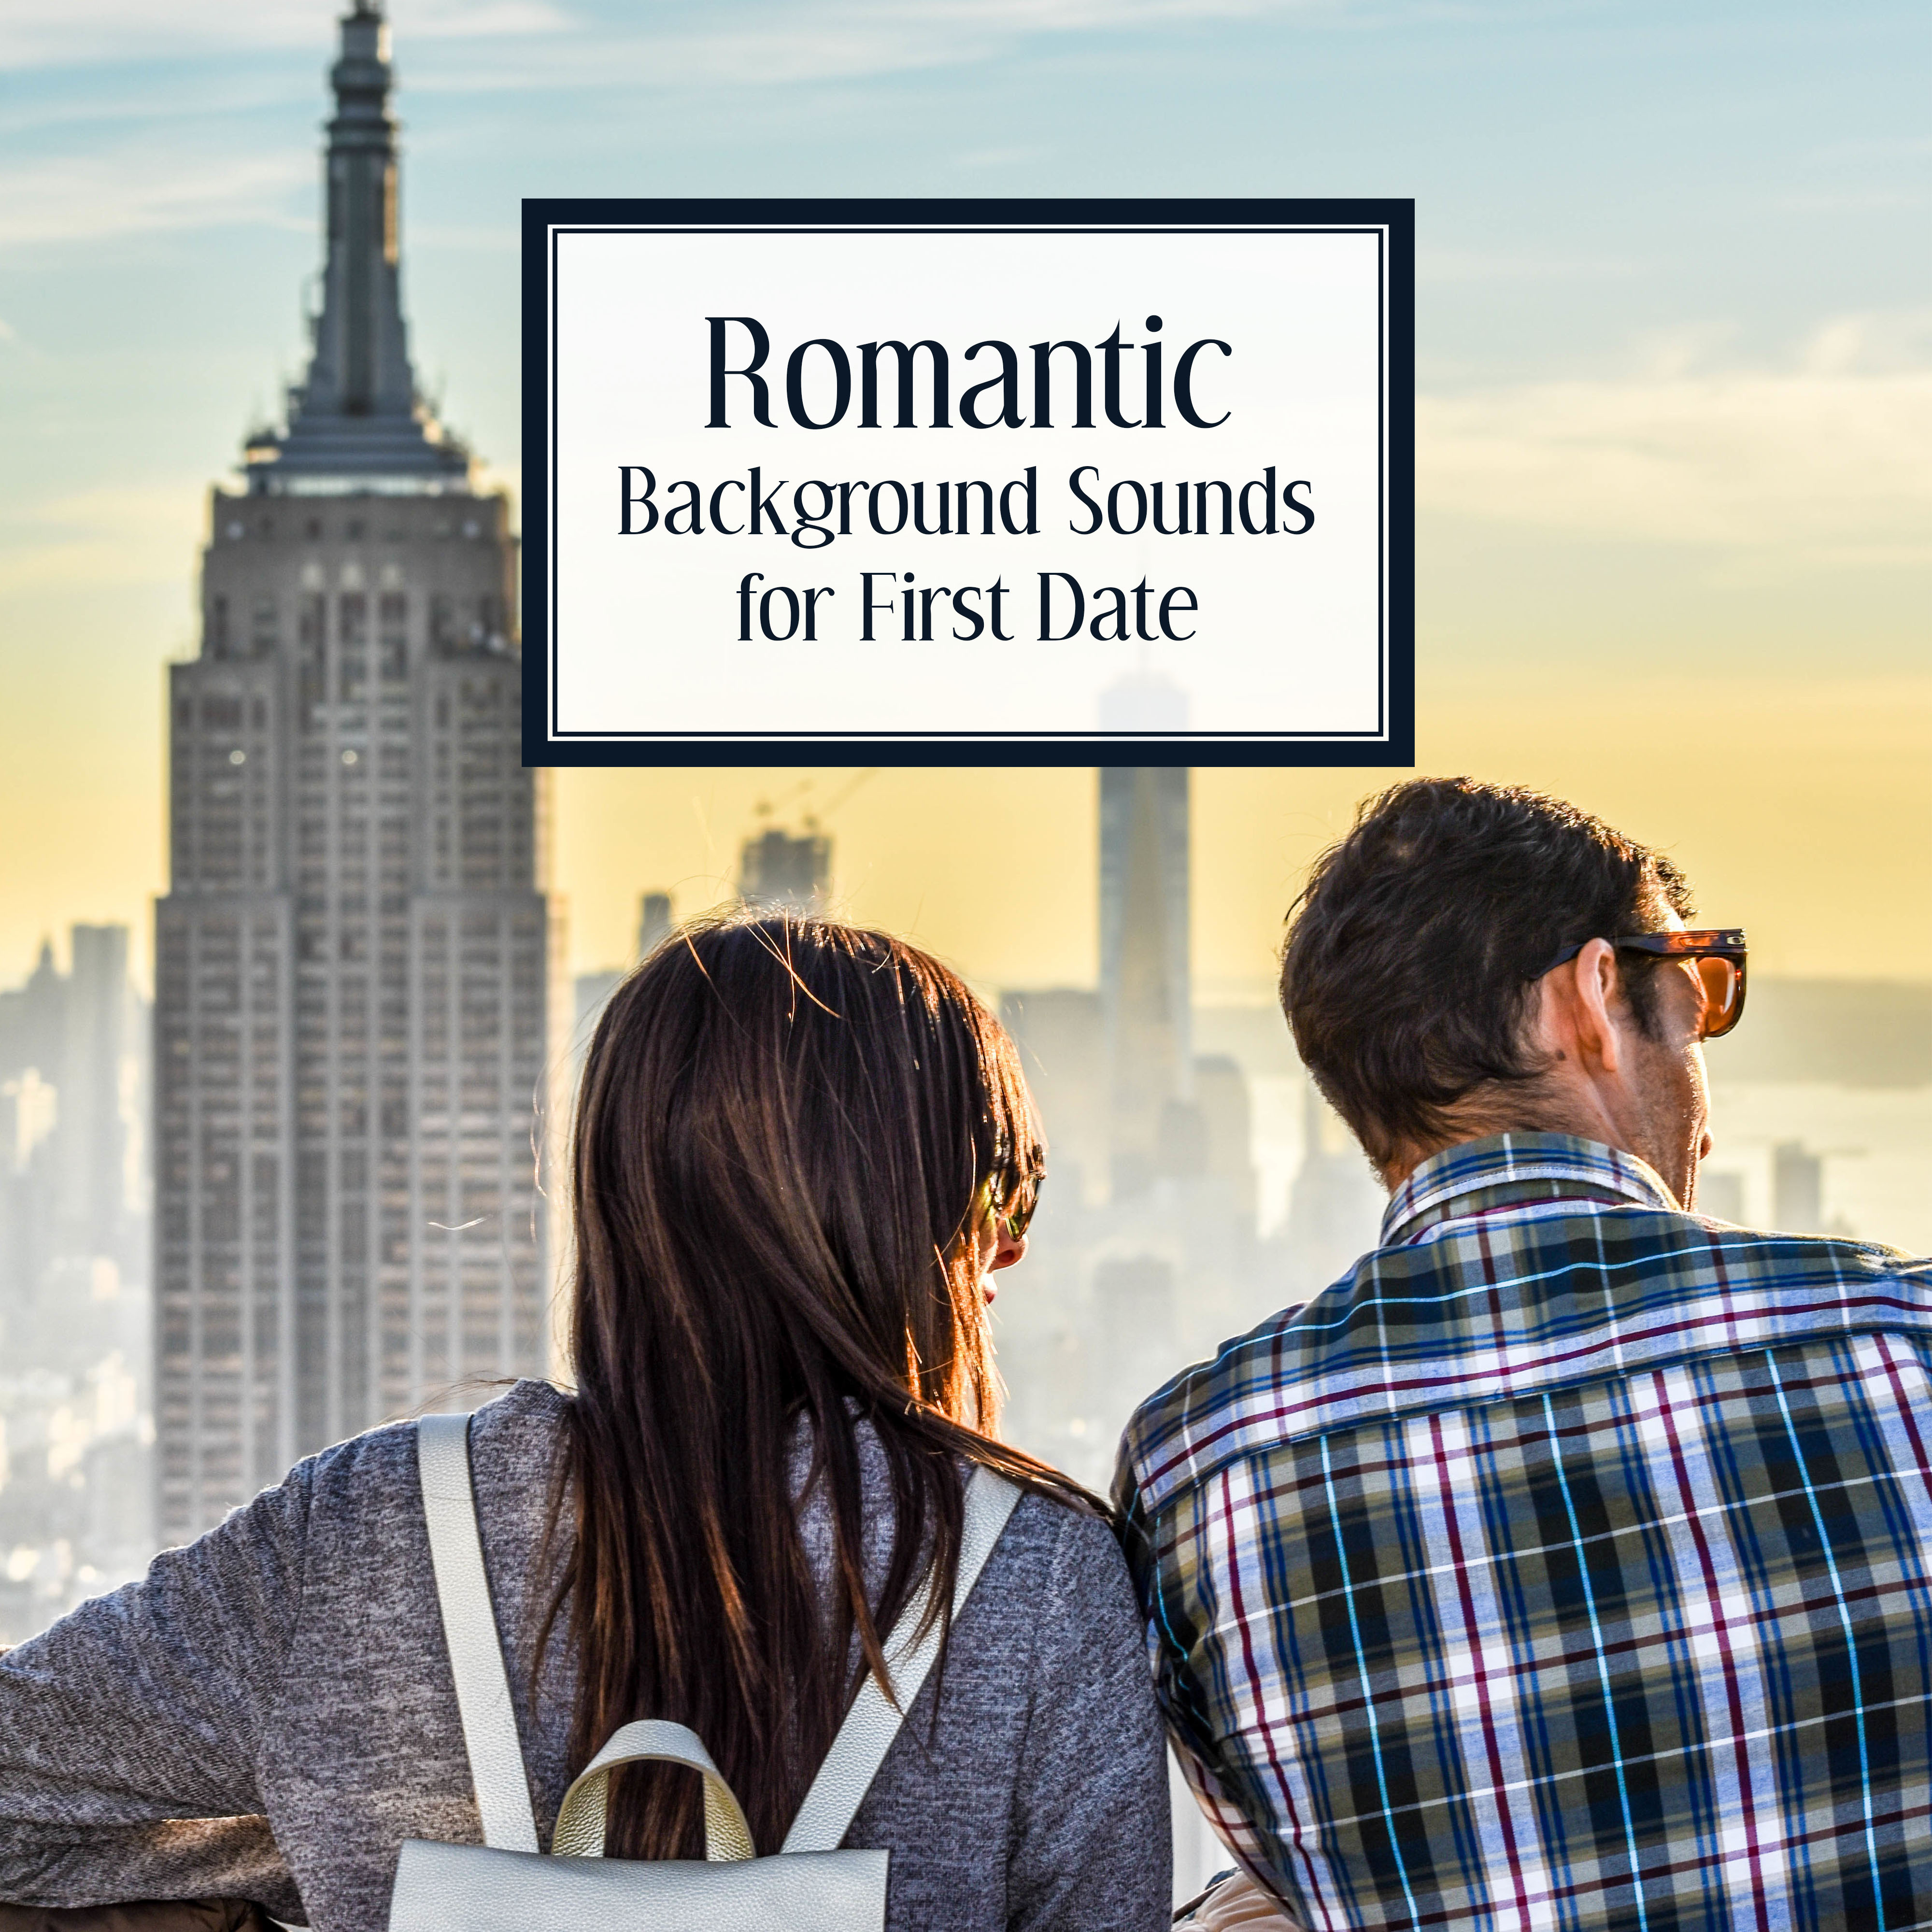 Romantic Background Sounds for First Date – Soft Piano Sounds, Jazz Music for Lovers, Candlelight Dinner